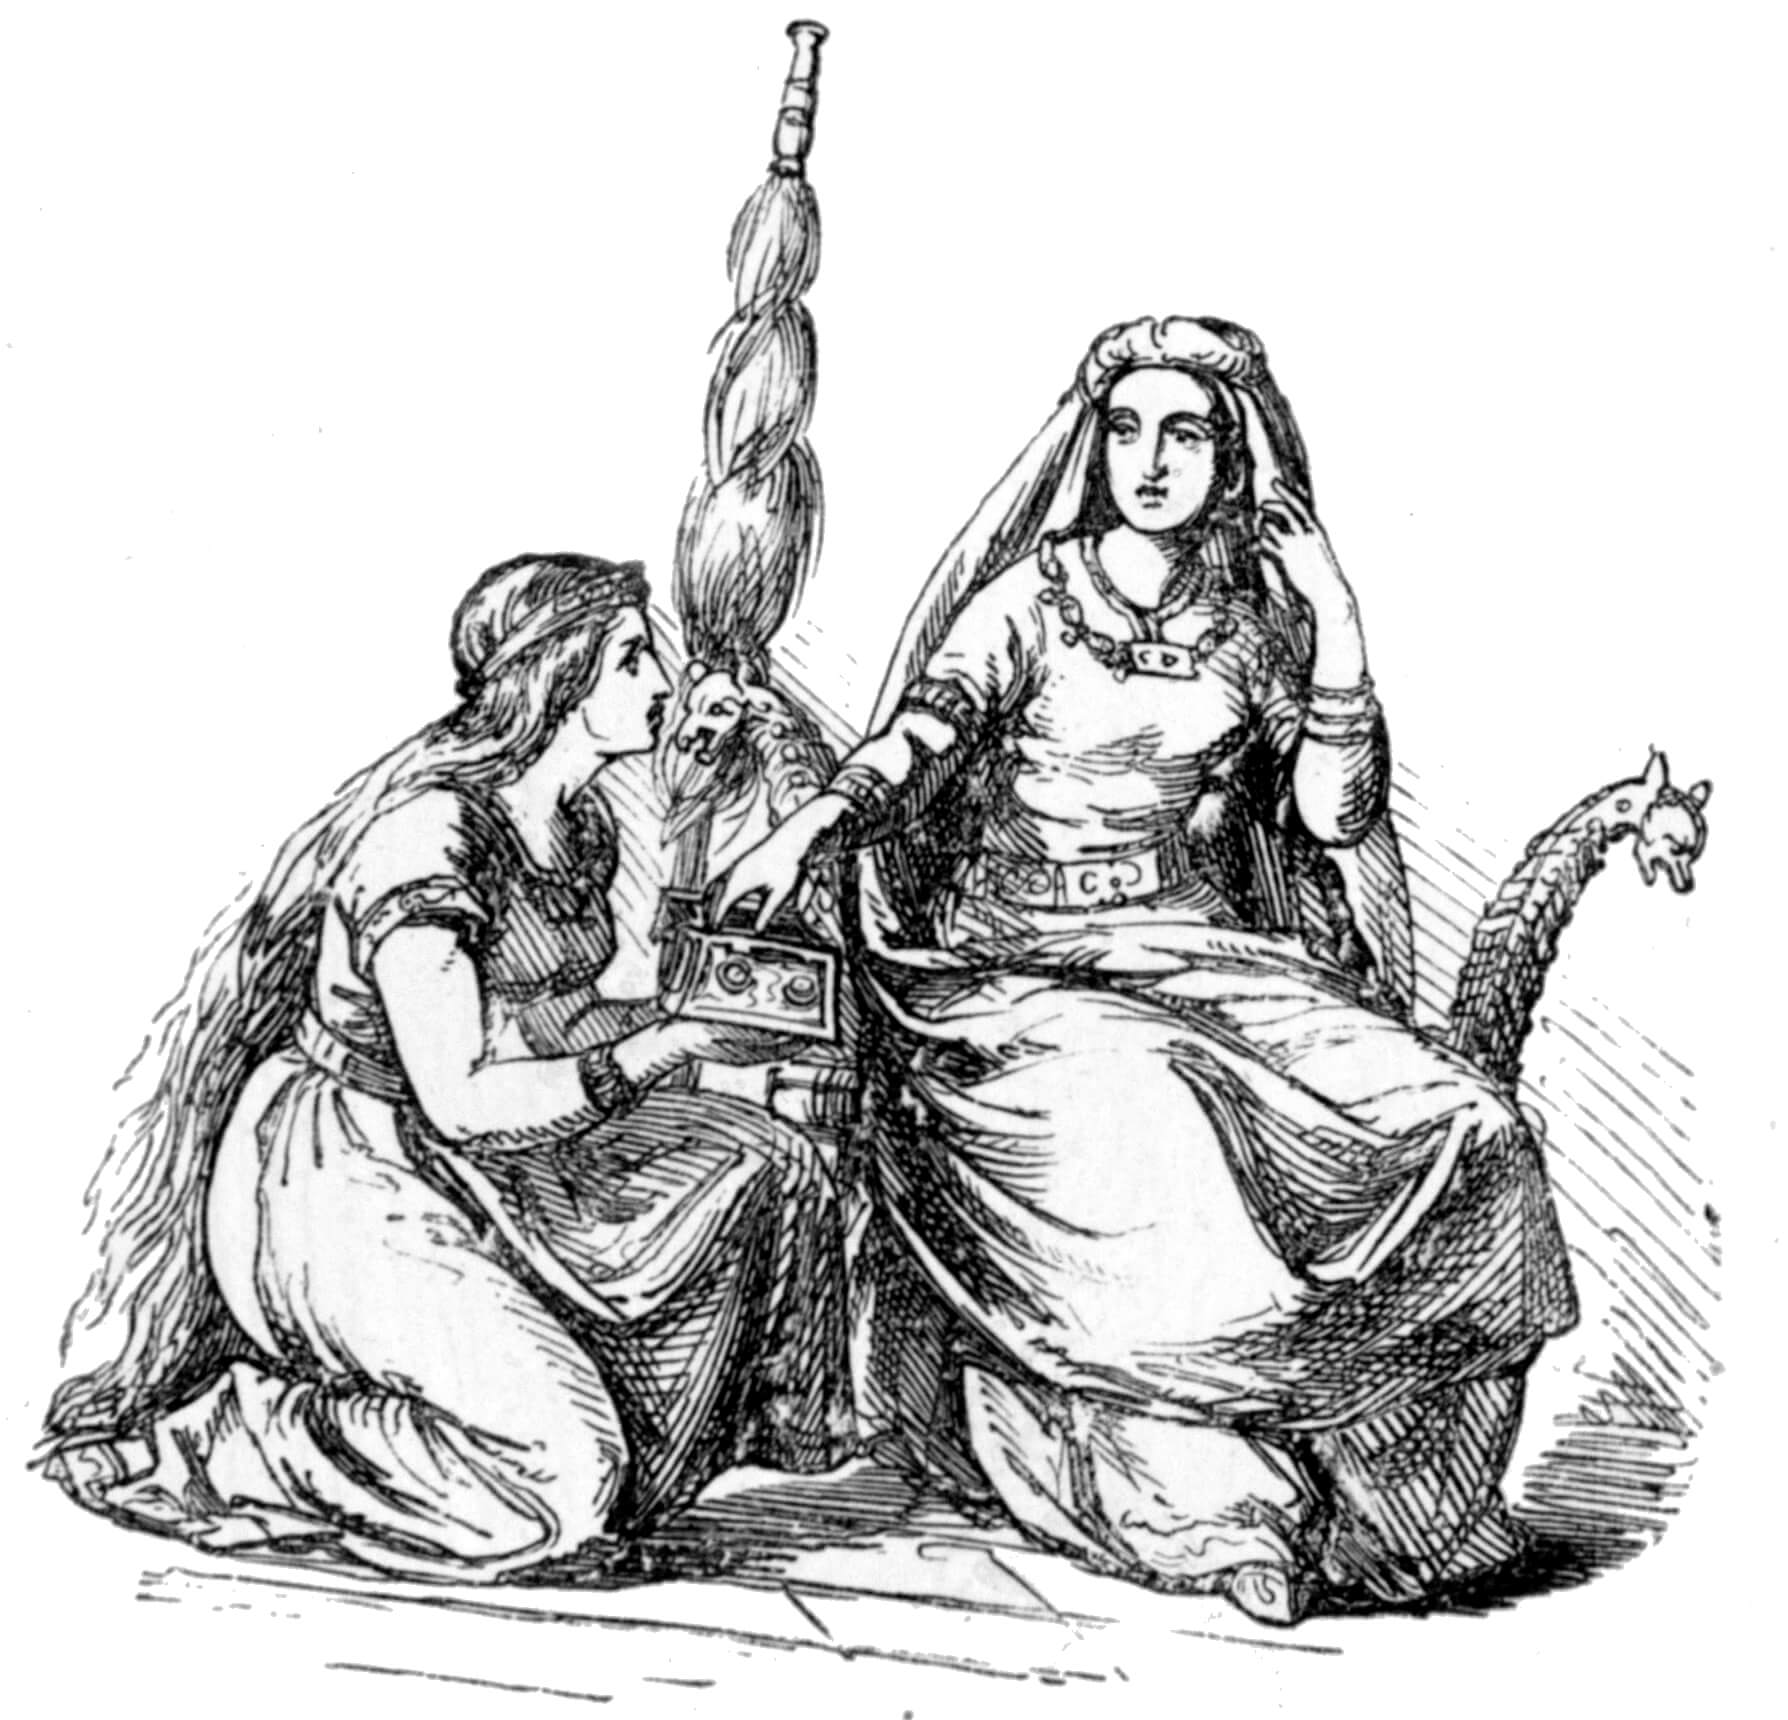 Frigga with her spindle, and with Fulla and her box nearby